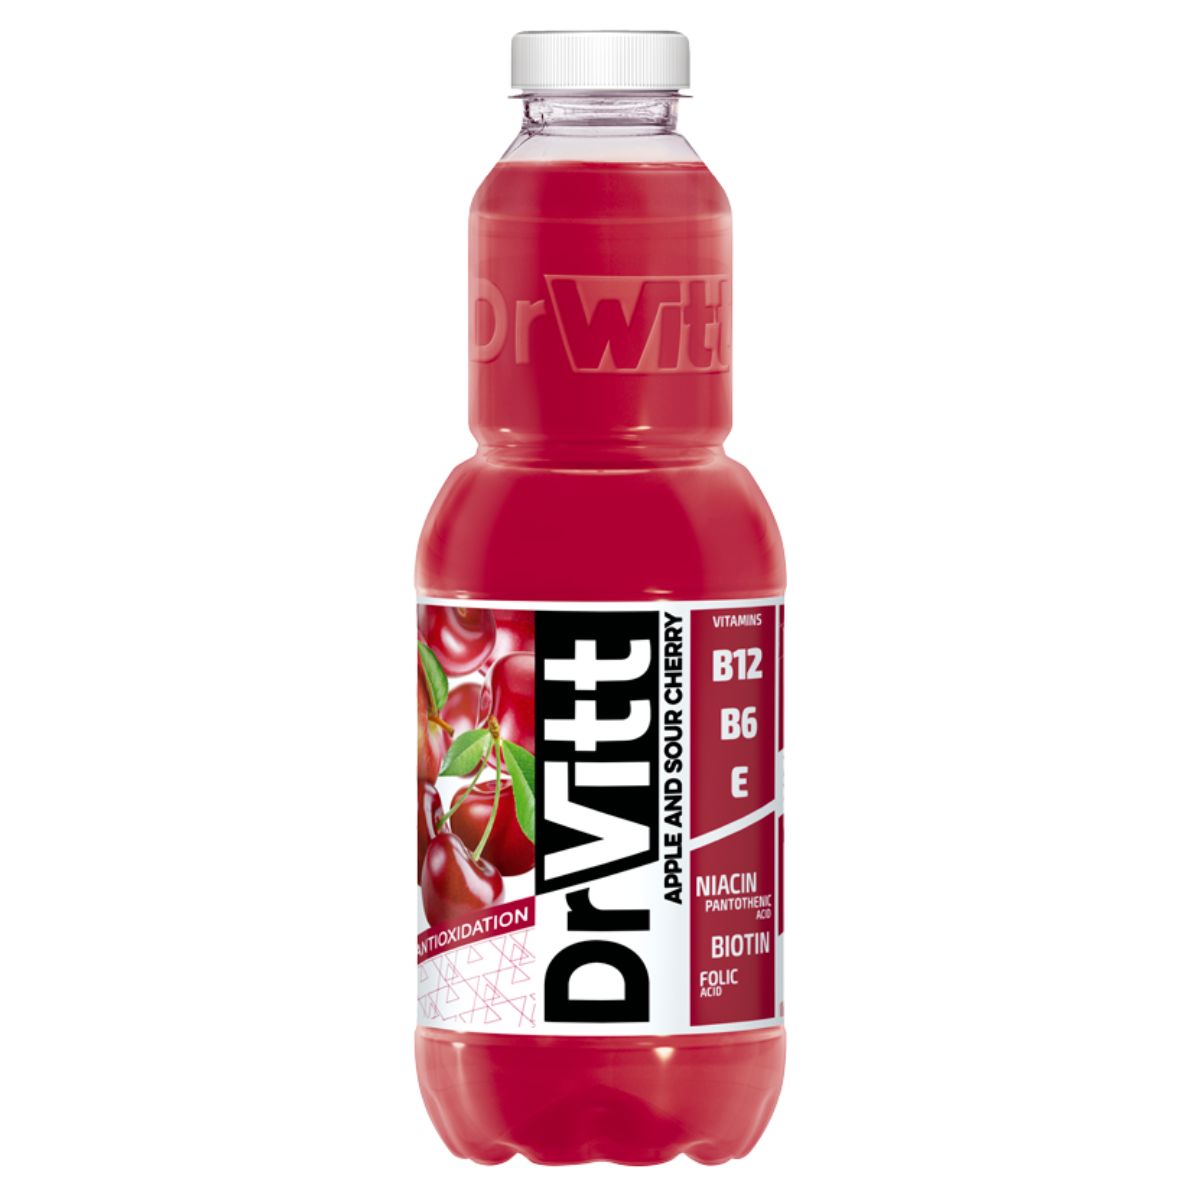 A bottle of Dr Witt - Apple & Sour Cherry - 1 Litre drink on a white background.